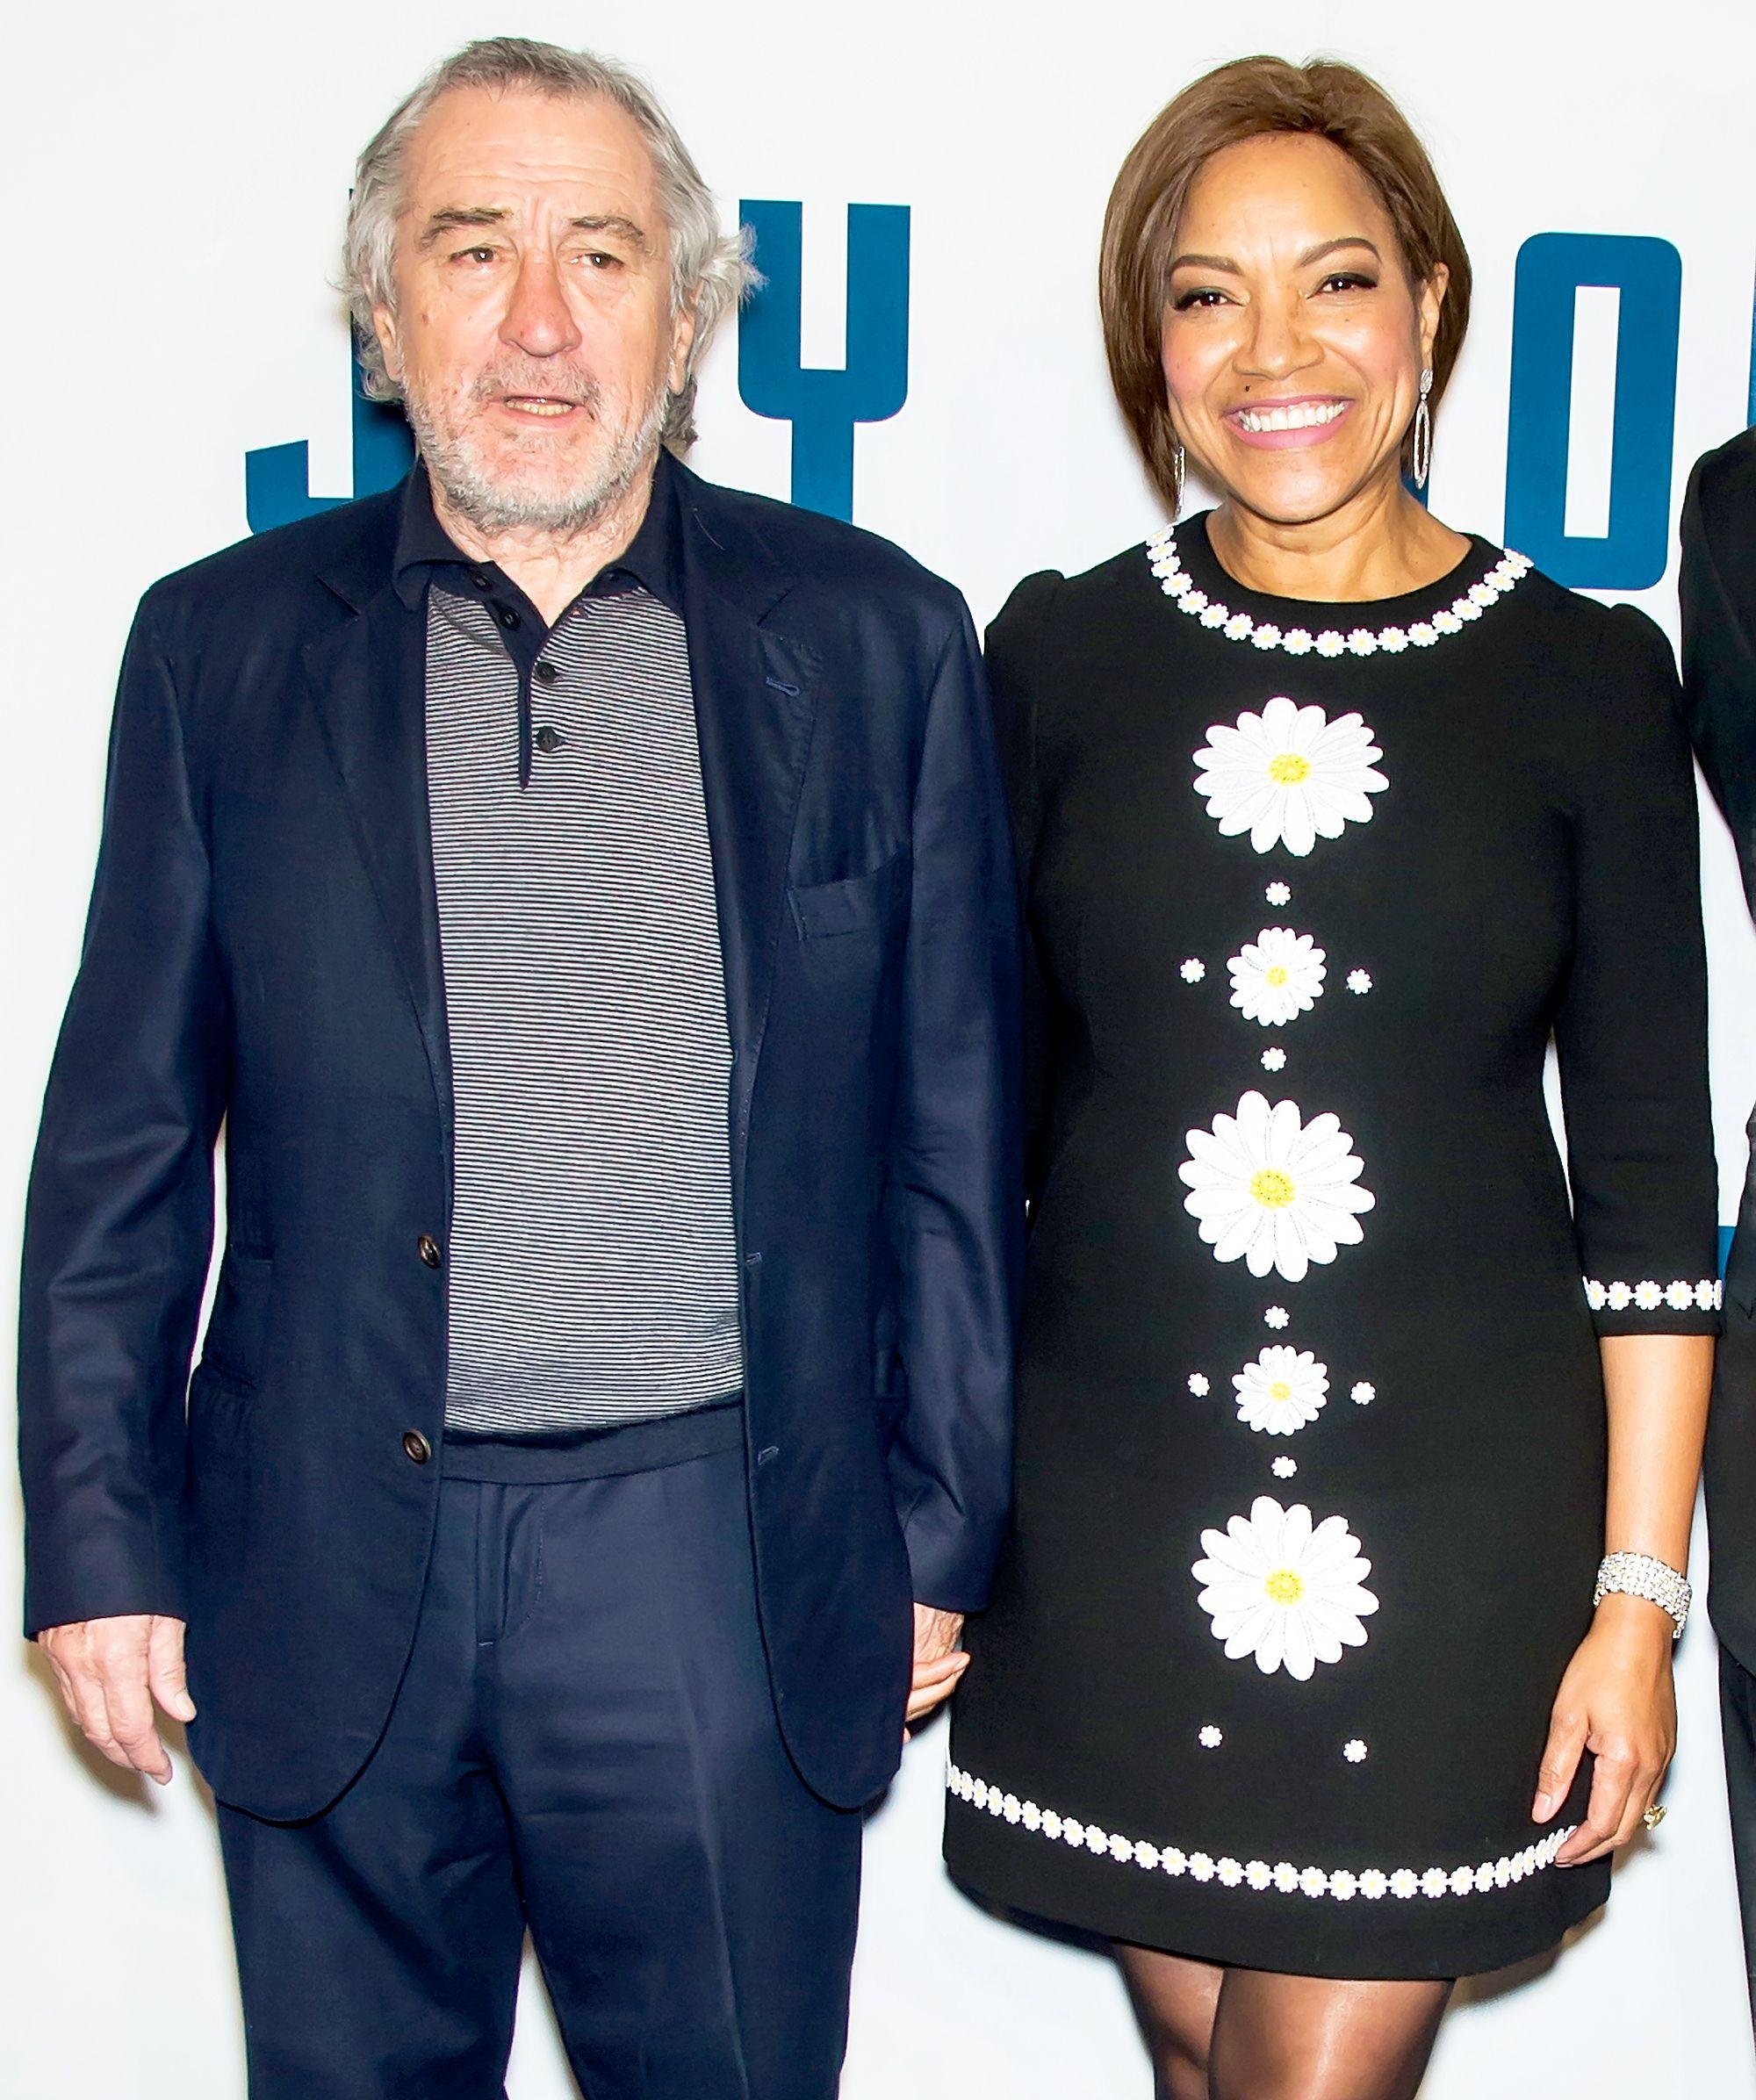 Robert De Niro Gives Controversial Interview About Autism